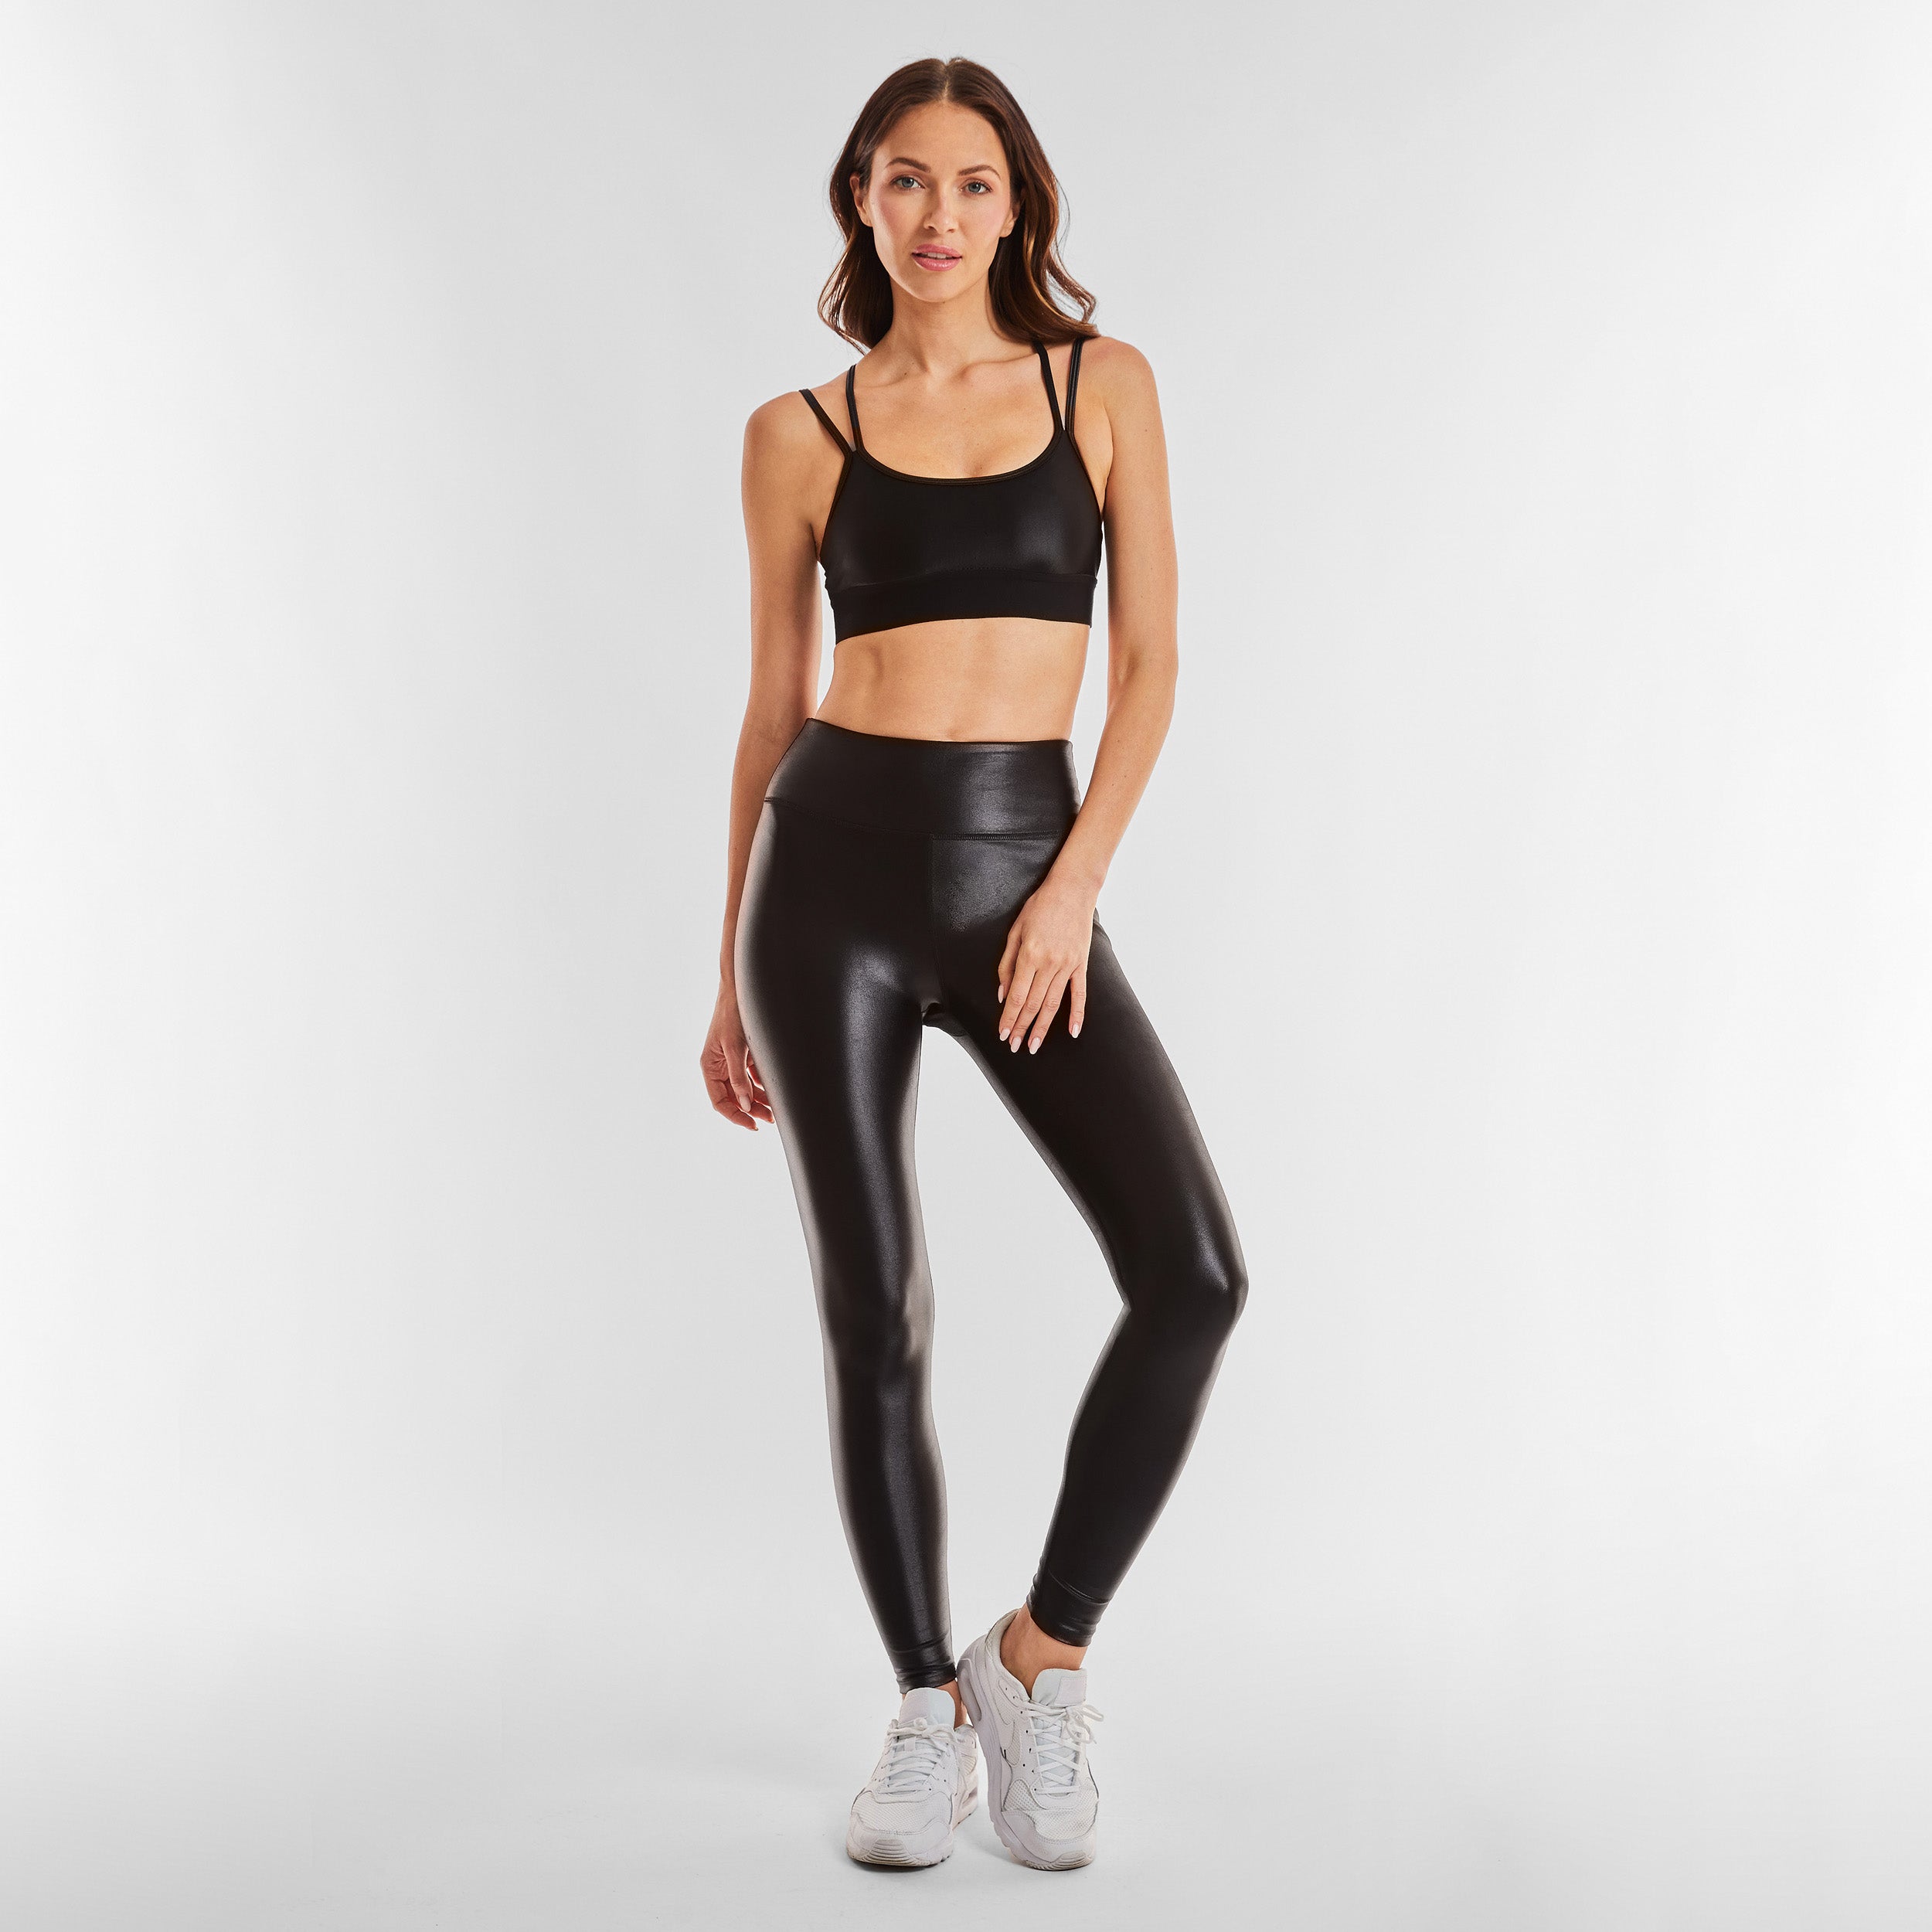 Full body view of woman wearing black gloss liquid sports bra featuring a scoop neckline and an alluring strappy back with a supportive elastic band